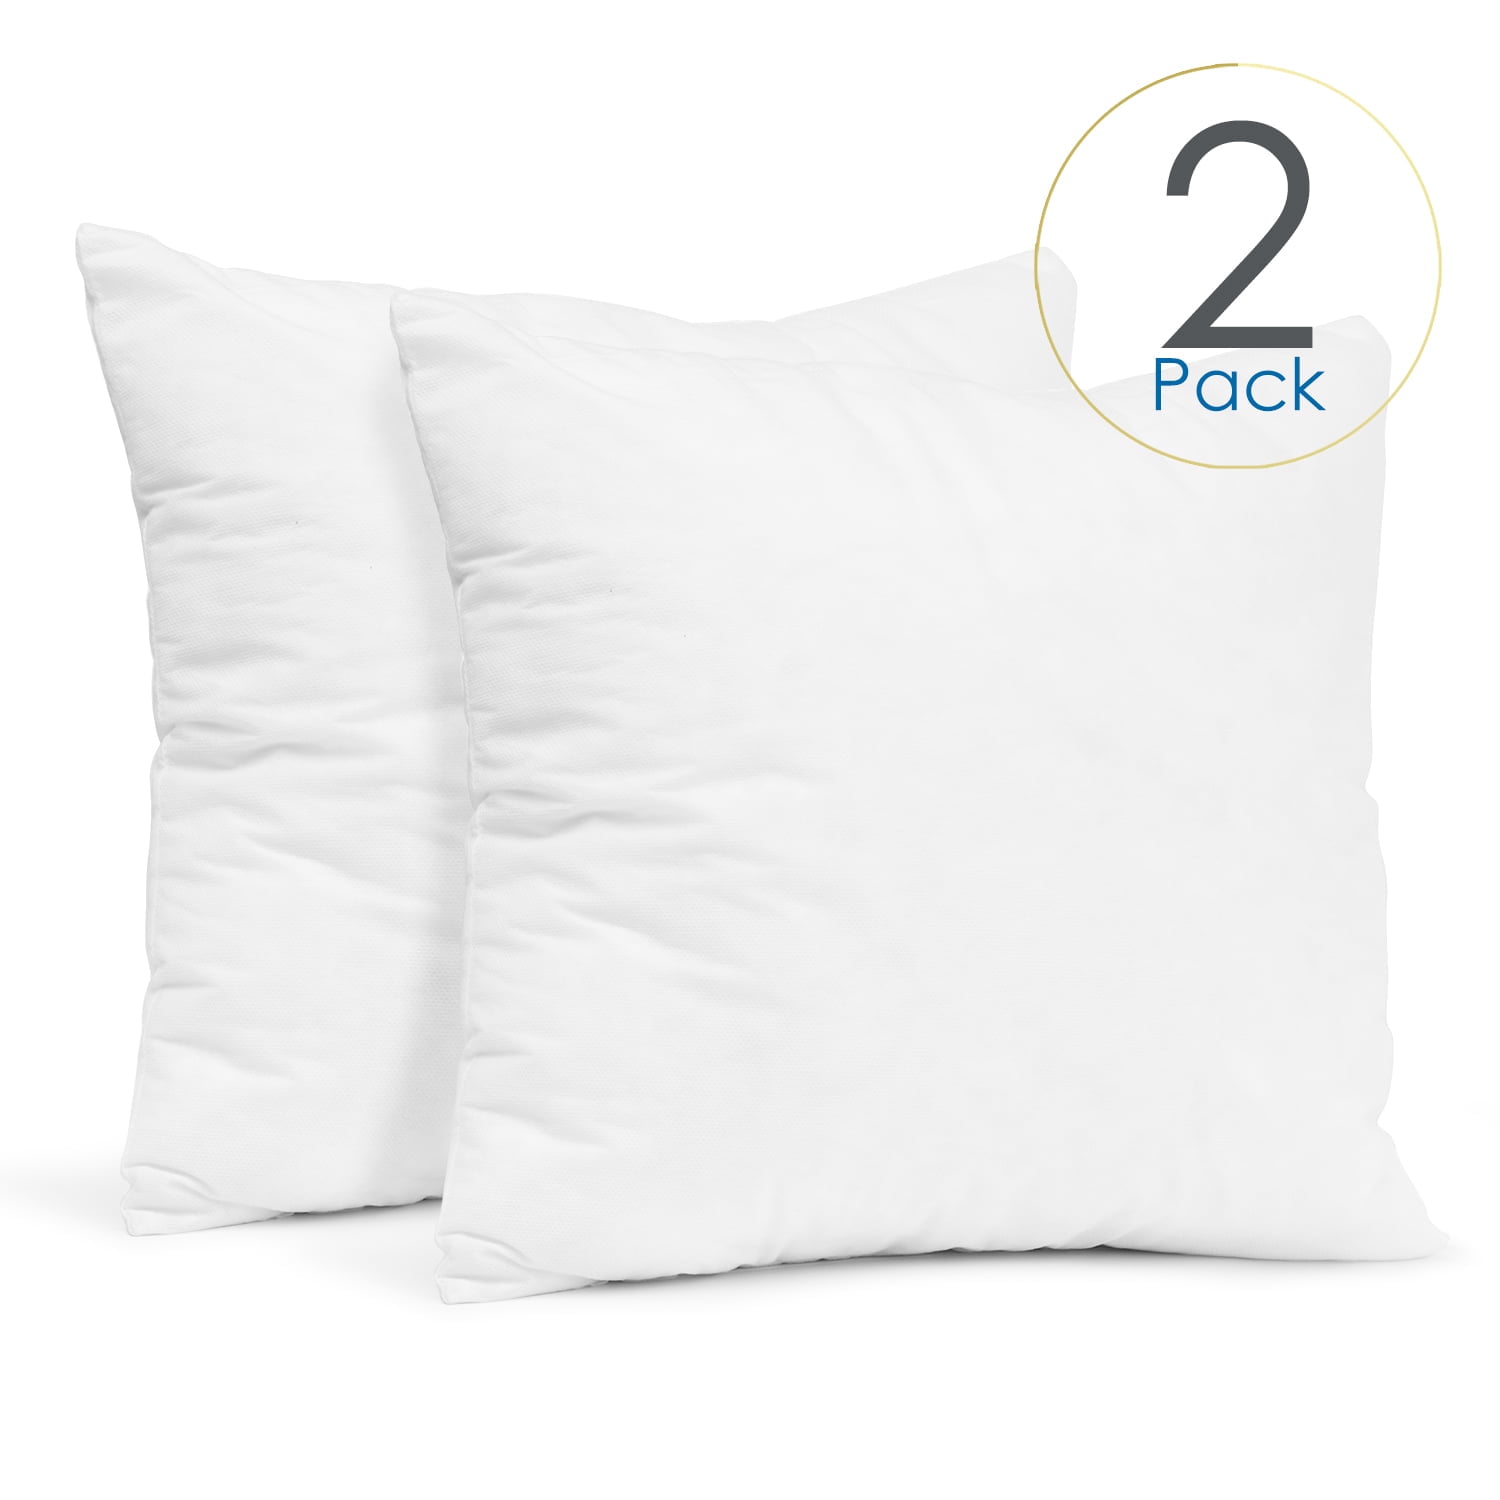 Utopia Bedding Throw Pillows Insert (Pack of 2, Black) - 18 x 18 Inches Bed  and Couch Pillows - Indoor Decorative Pillows